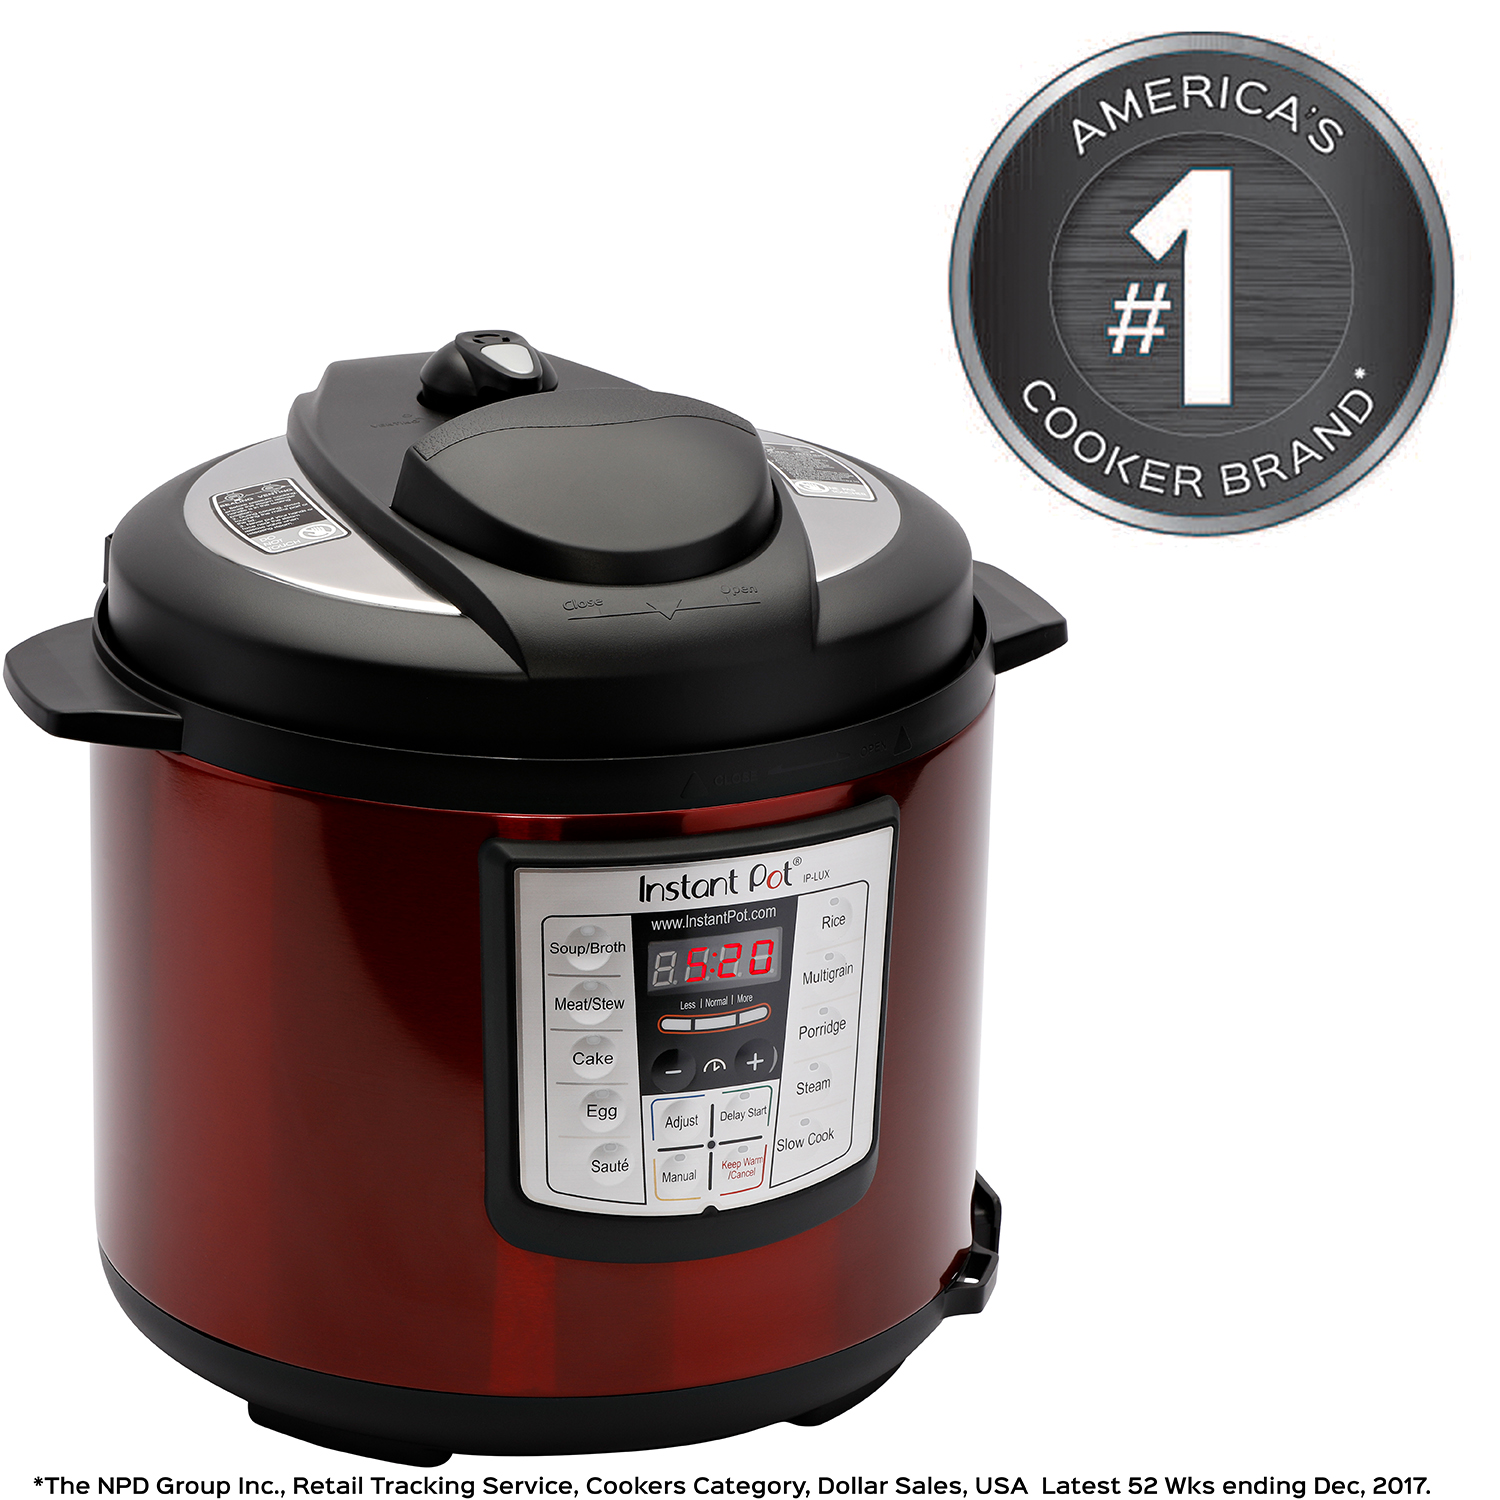 Instant Pot LUX60 Red Stainless Steel 6 Qt 6-in-1 Multi-Use Programmable Pressure Cooker, Slow Cooker, Rice Cooker, Saute, Steamer, and Warmer - image 5 of 8